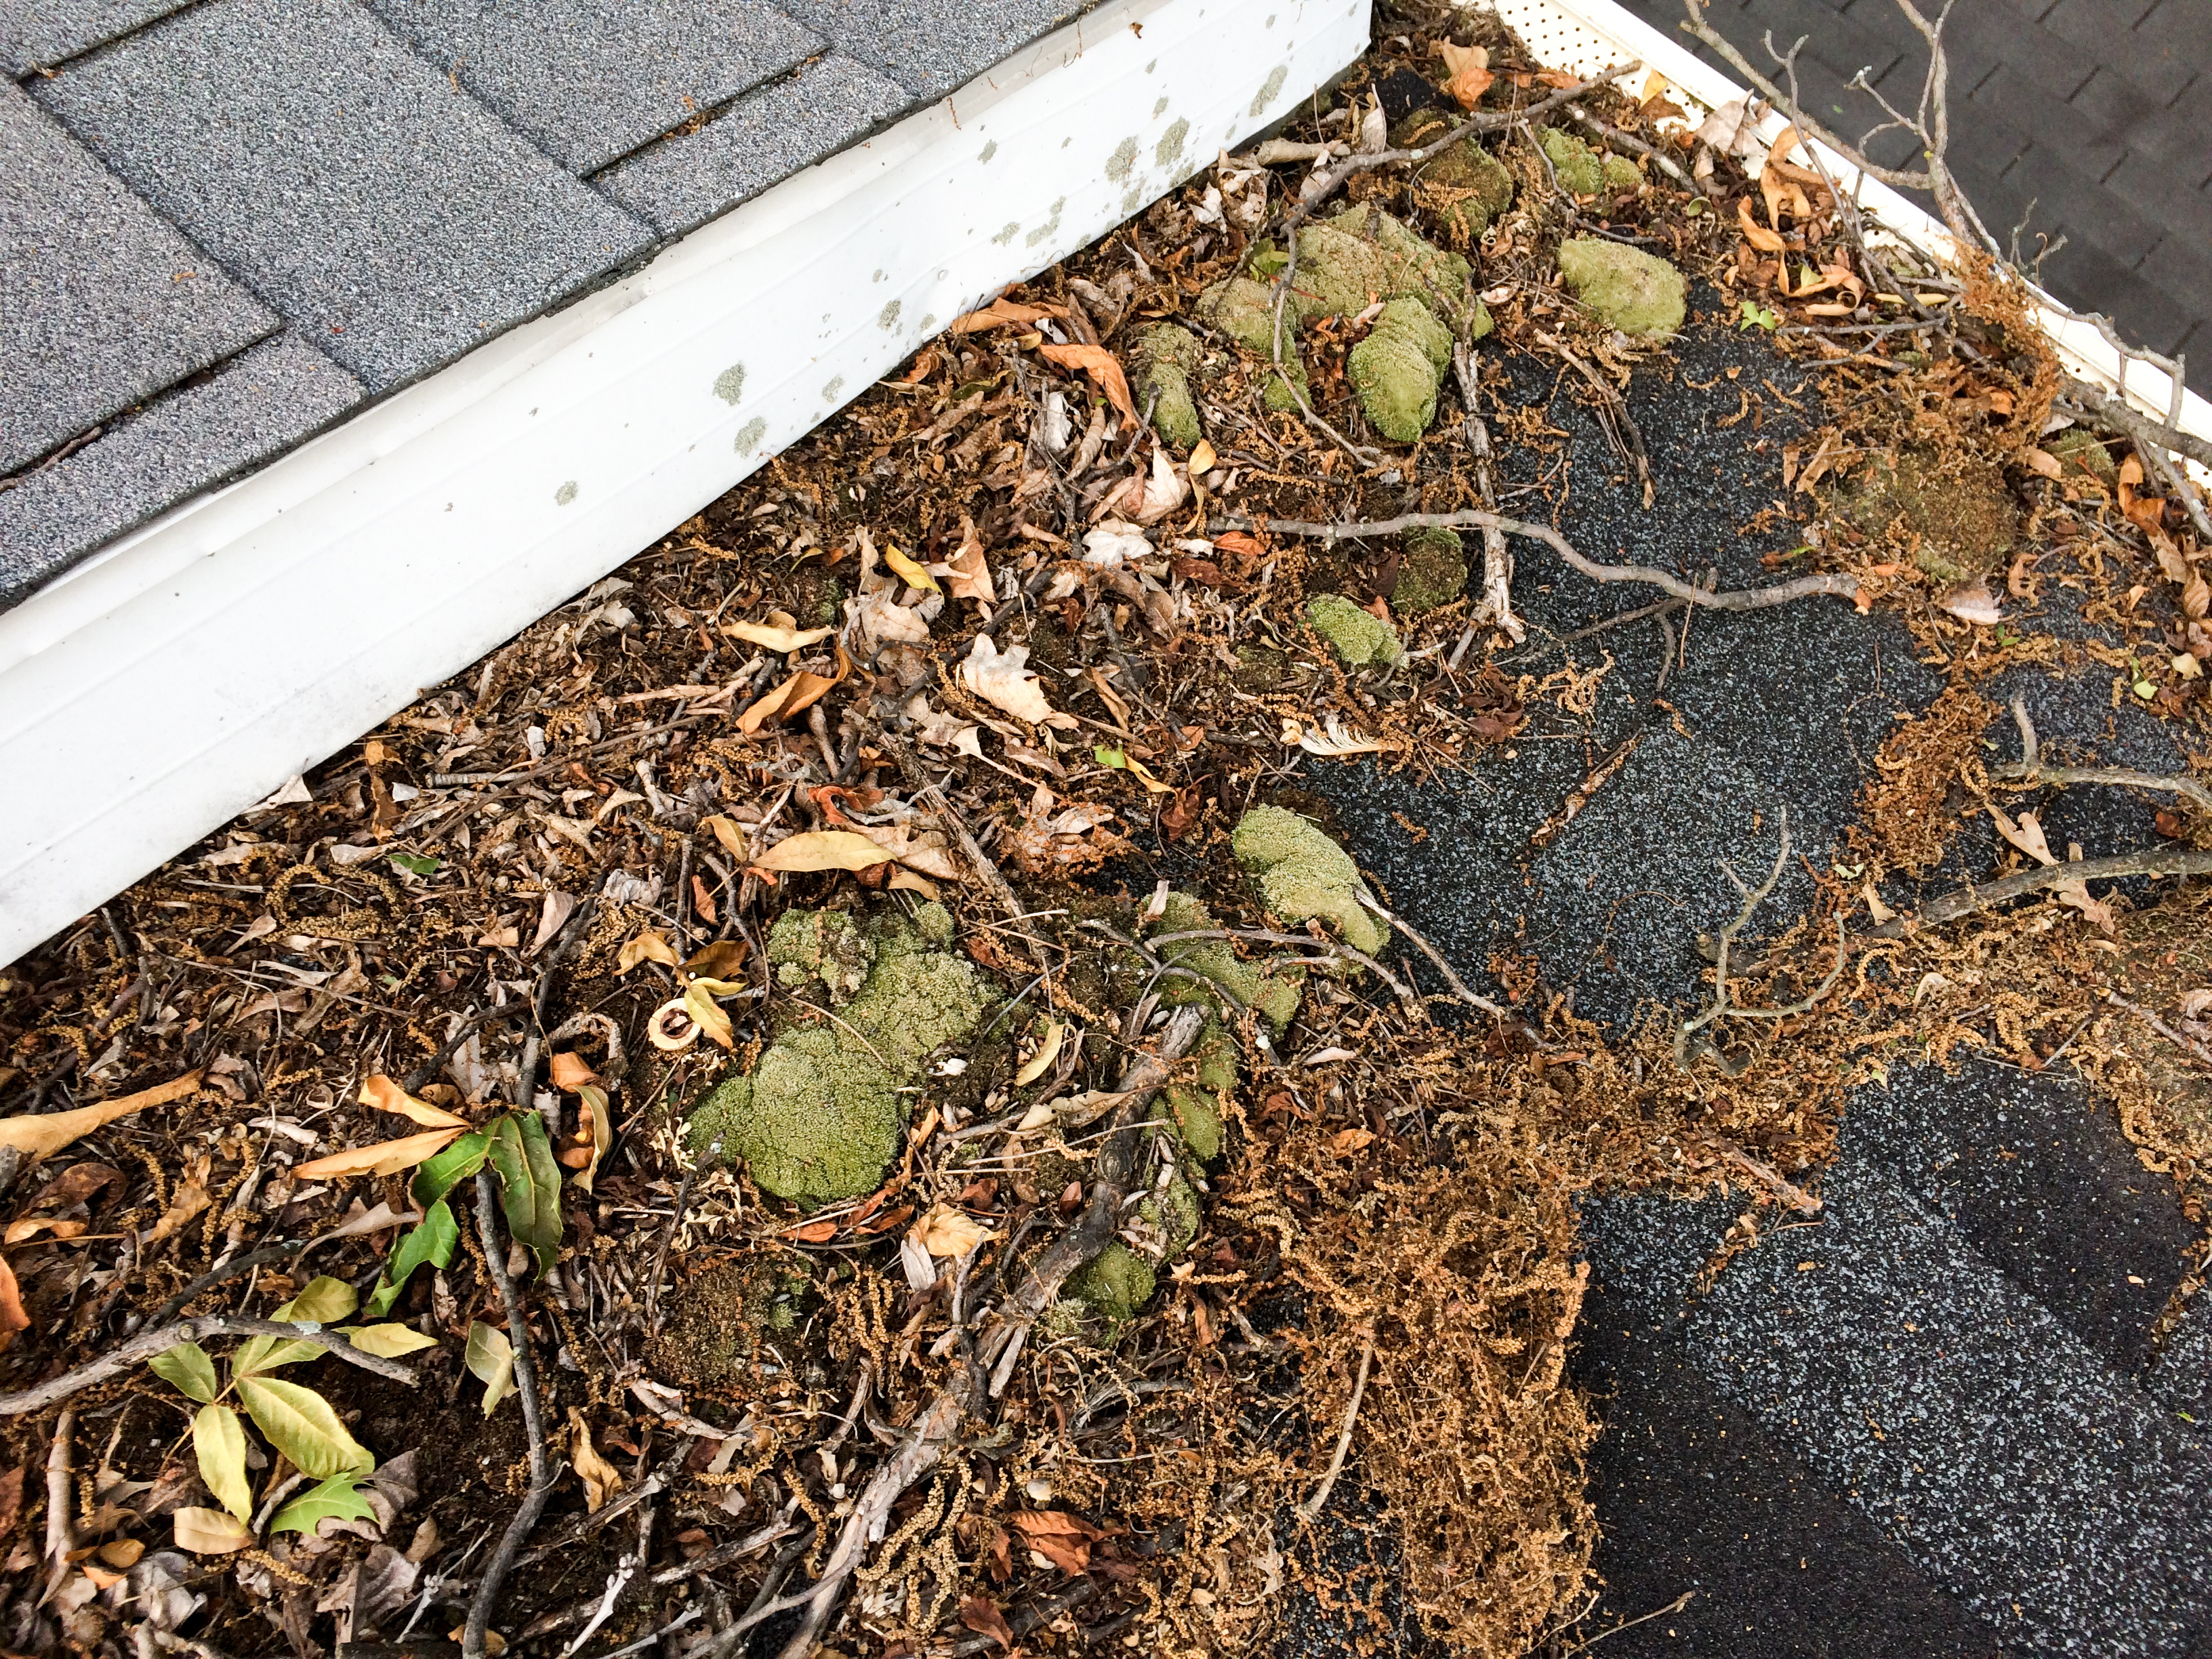 Leaves on a rooftop with shingles and a clogged gutter from debris